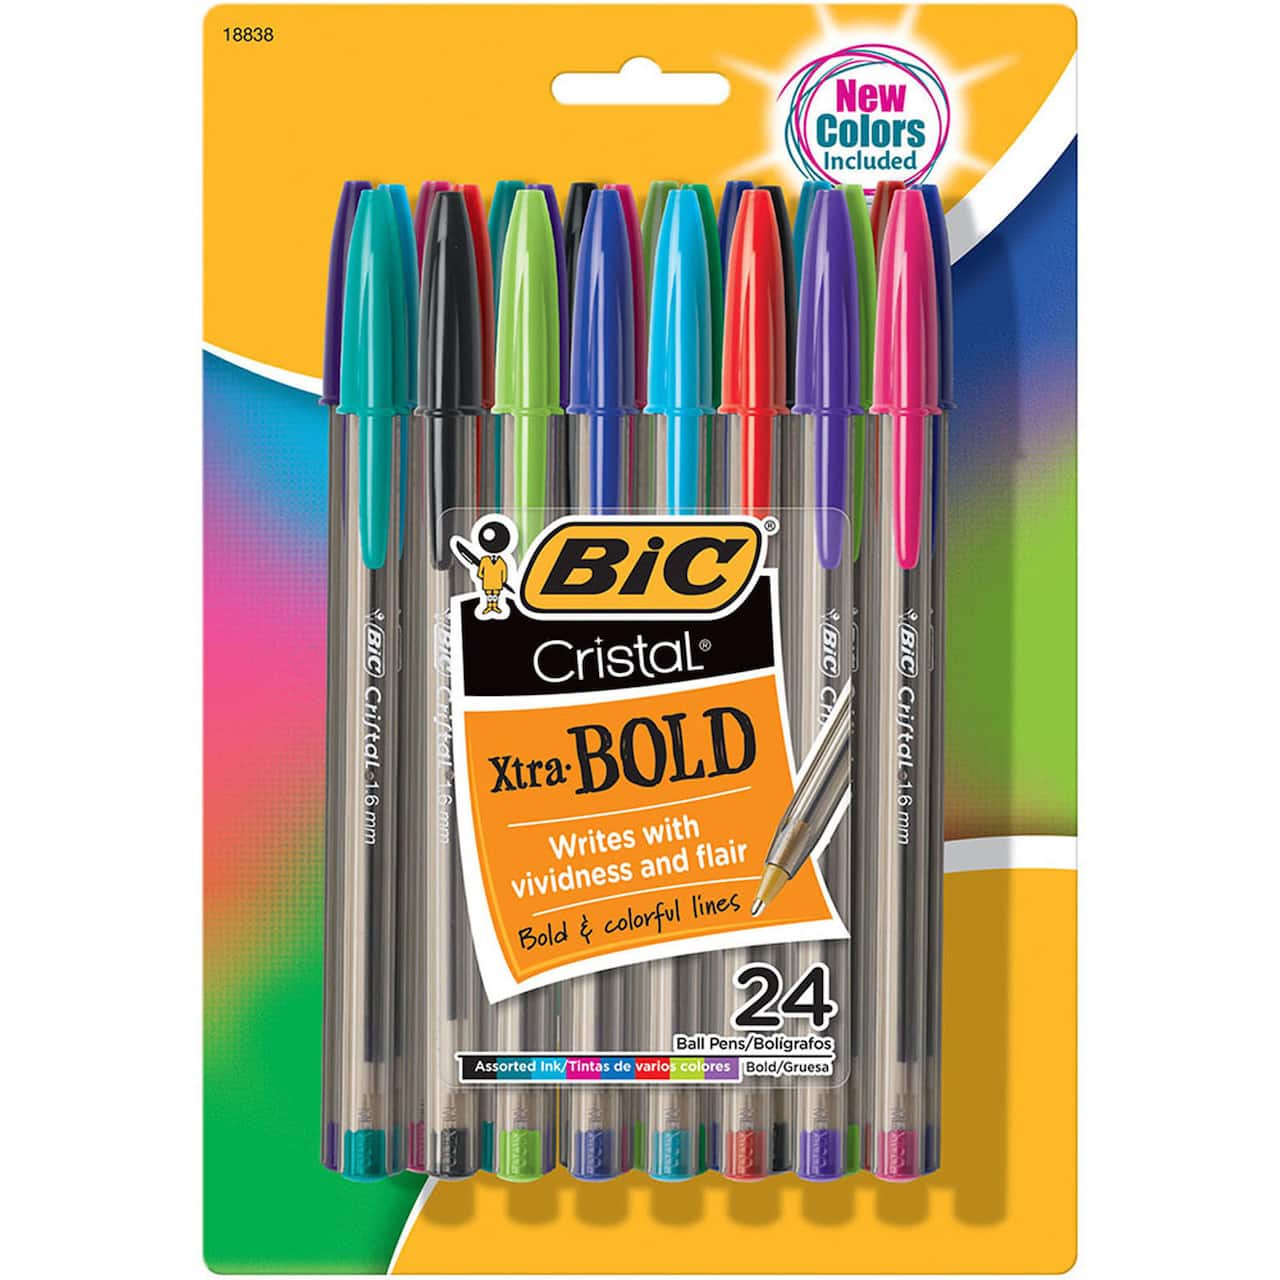 BIC&#xAE; Cristal&#xAE; Xtra Bold Assorted Multicolored Pack, 24ct.